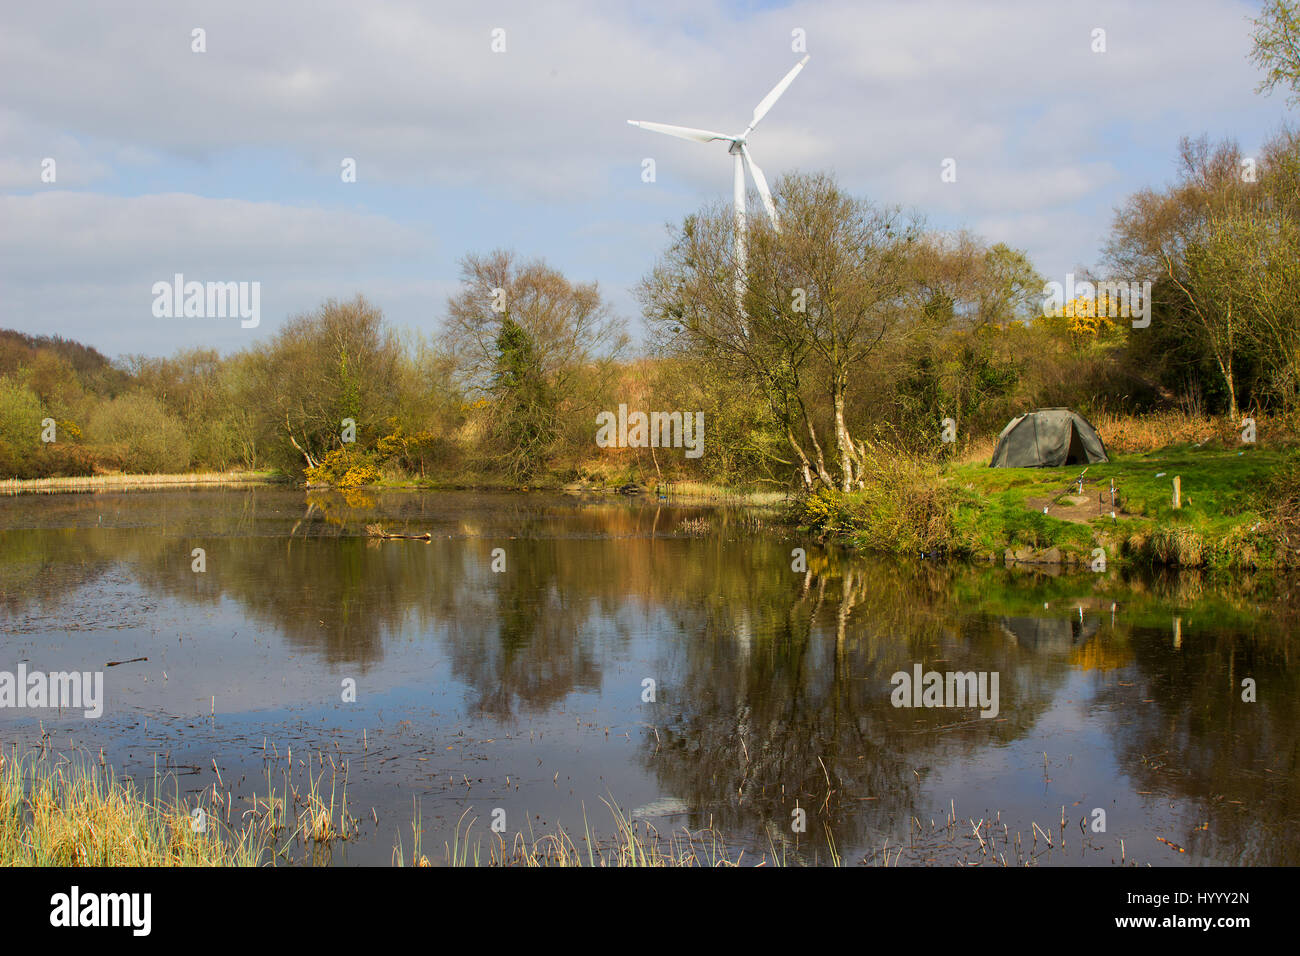 A two man tent pitched on a piece of ground beside the lake at the old lead mines workings in Conlig, County Down in N Ireland on an early spring day. Stock Photo